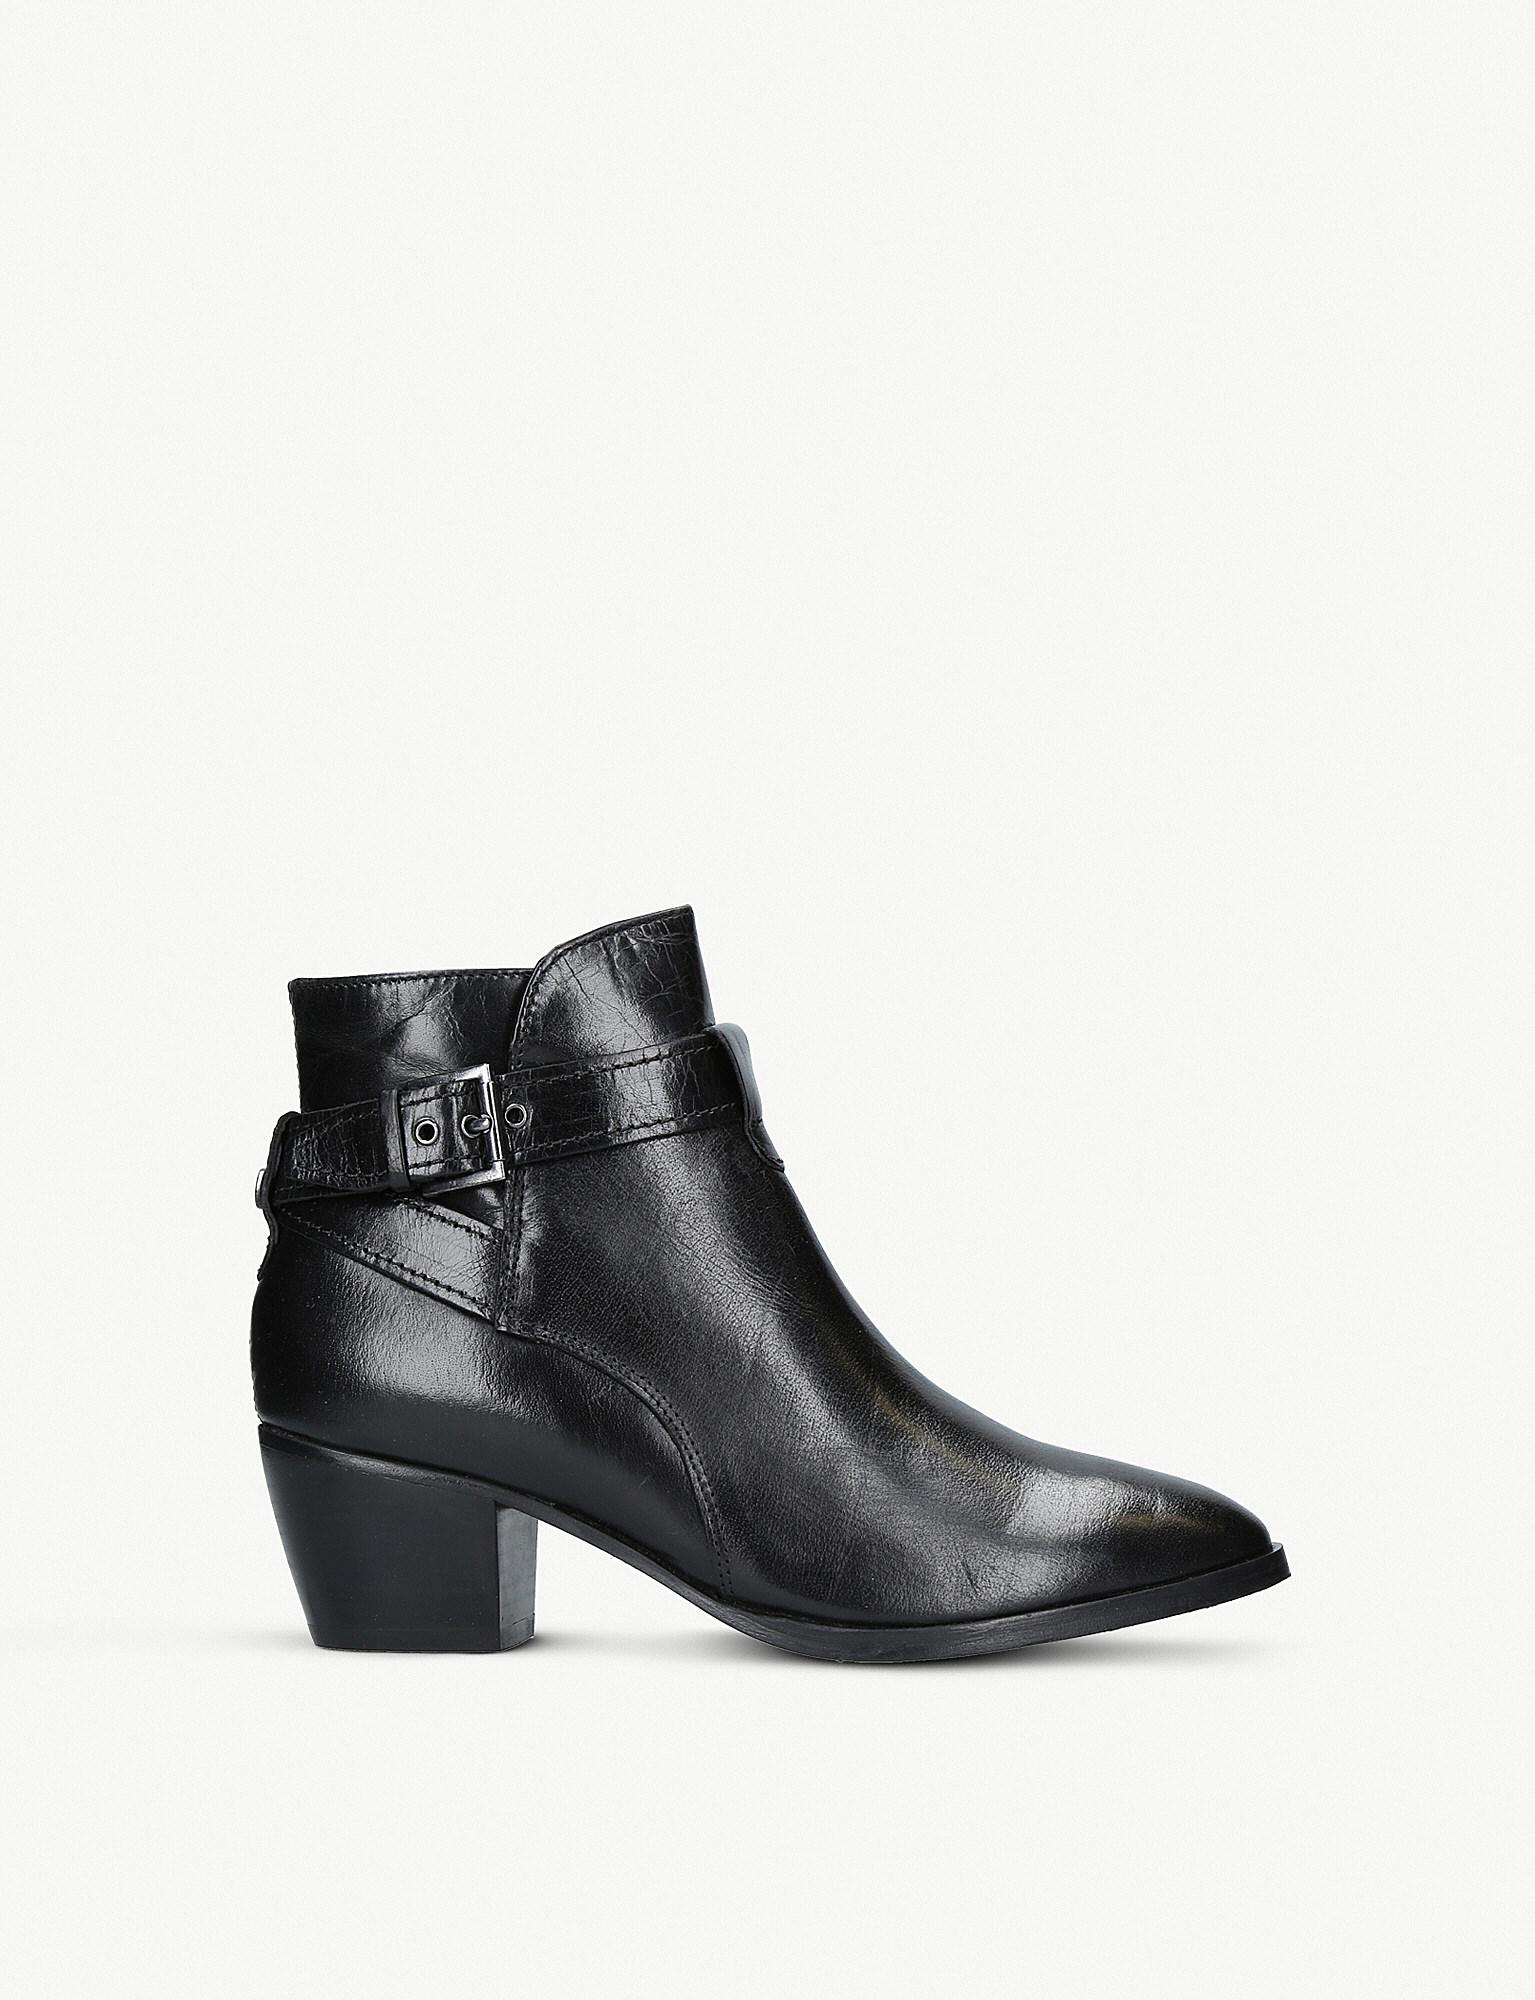 Nine West Naomi Leather Boots in Black | Lyst